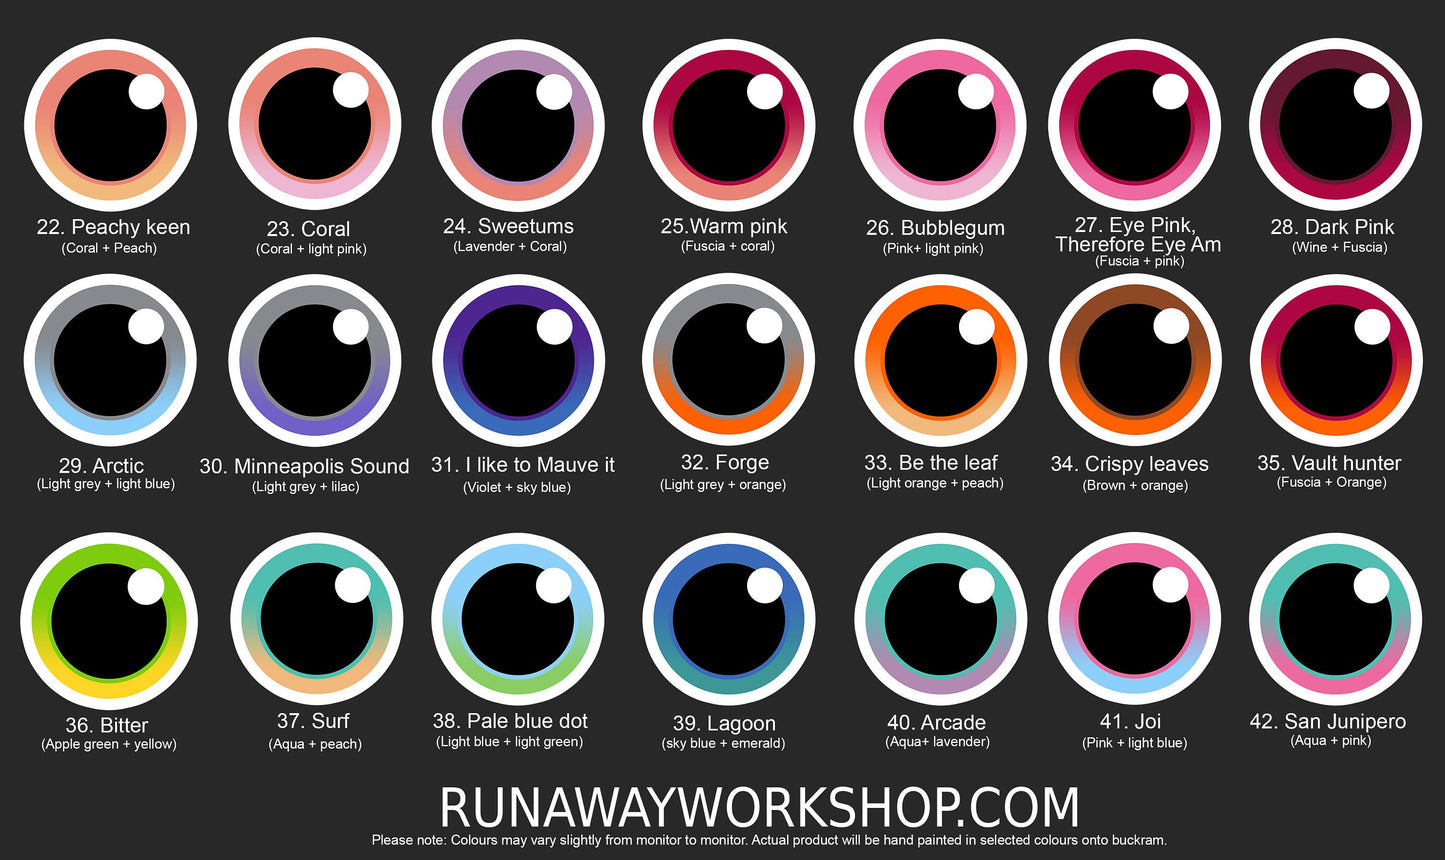 Large Toony follow me eyes for costumes, fursuits and mascots, 1 pair (Many colours and custom painted options) Waterproof